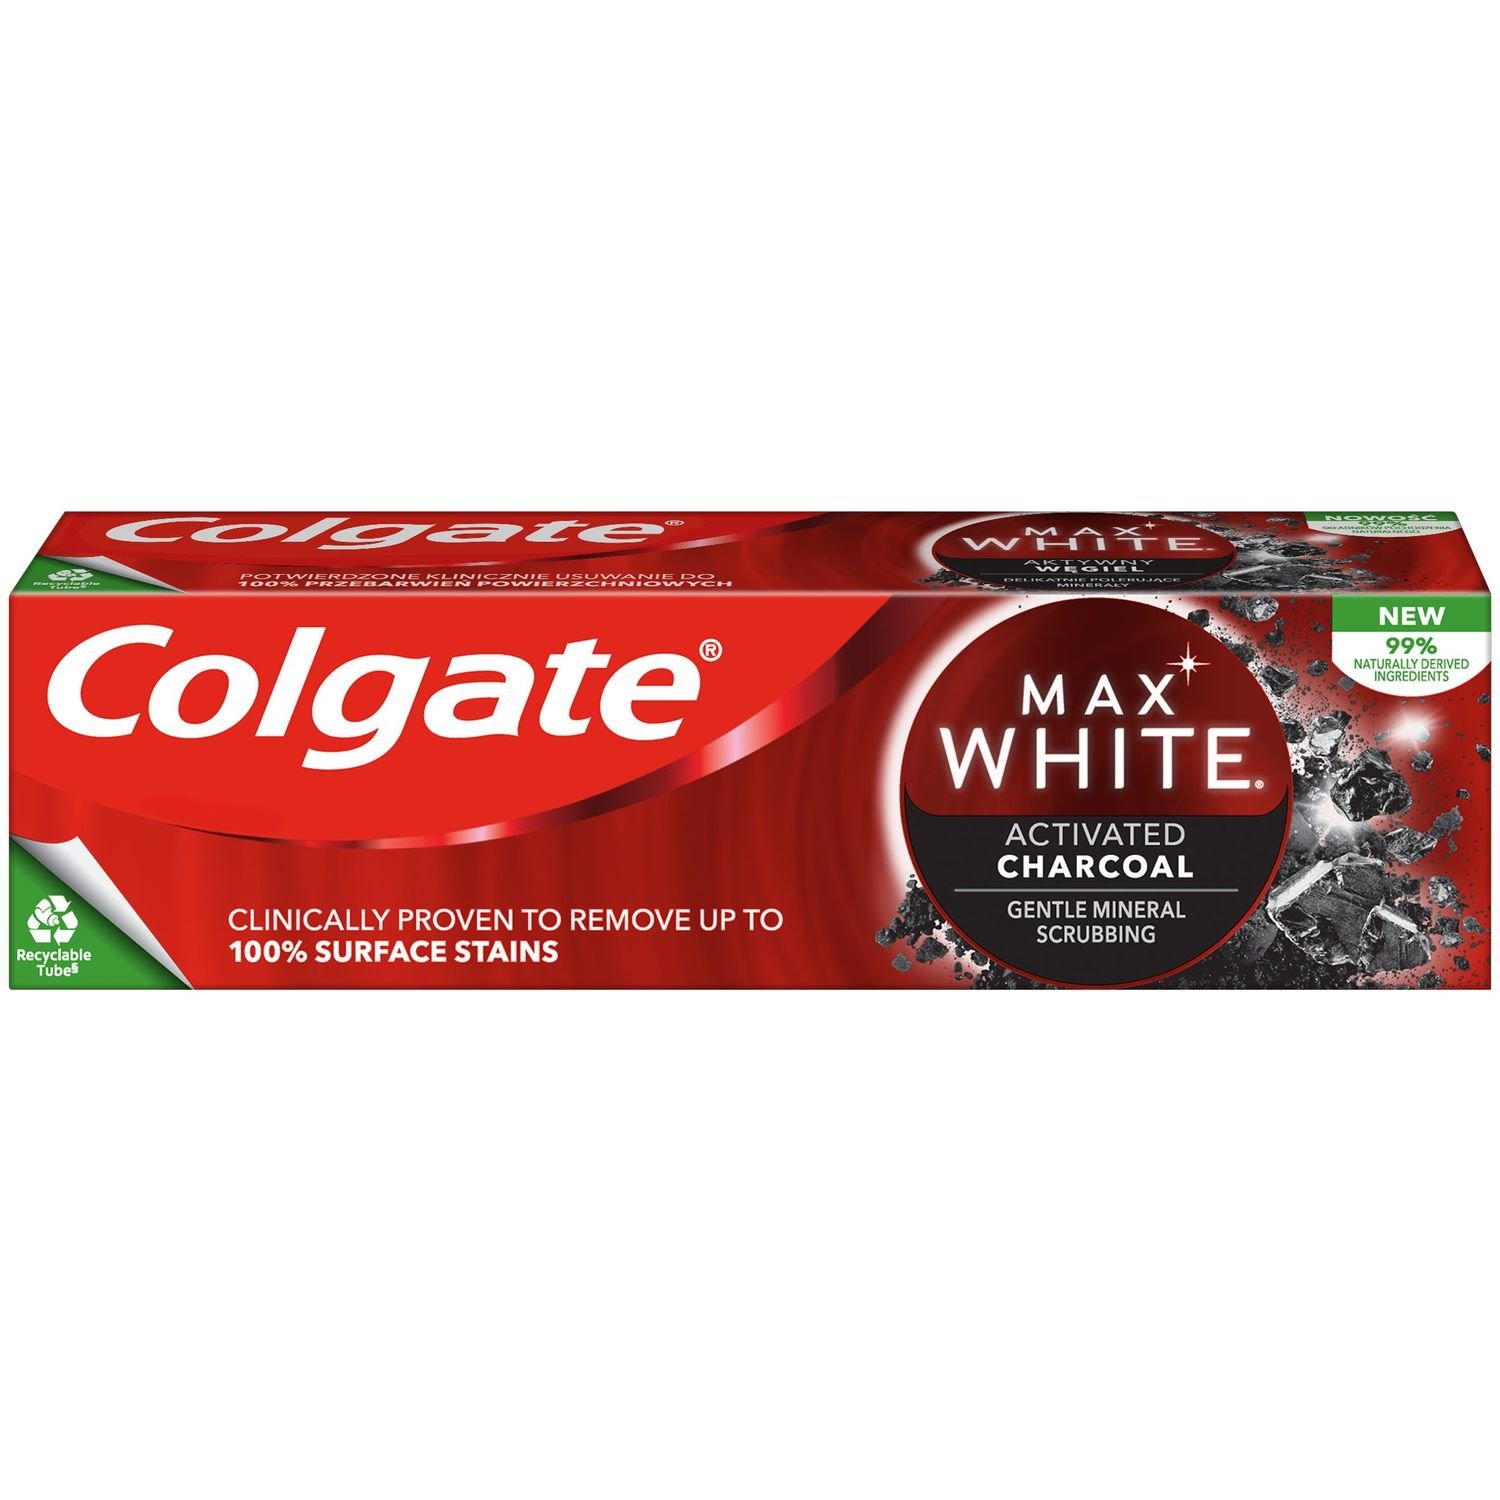 Зубная паста Colgate Max White Activated Charcoal 75 мл - фото 1